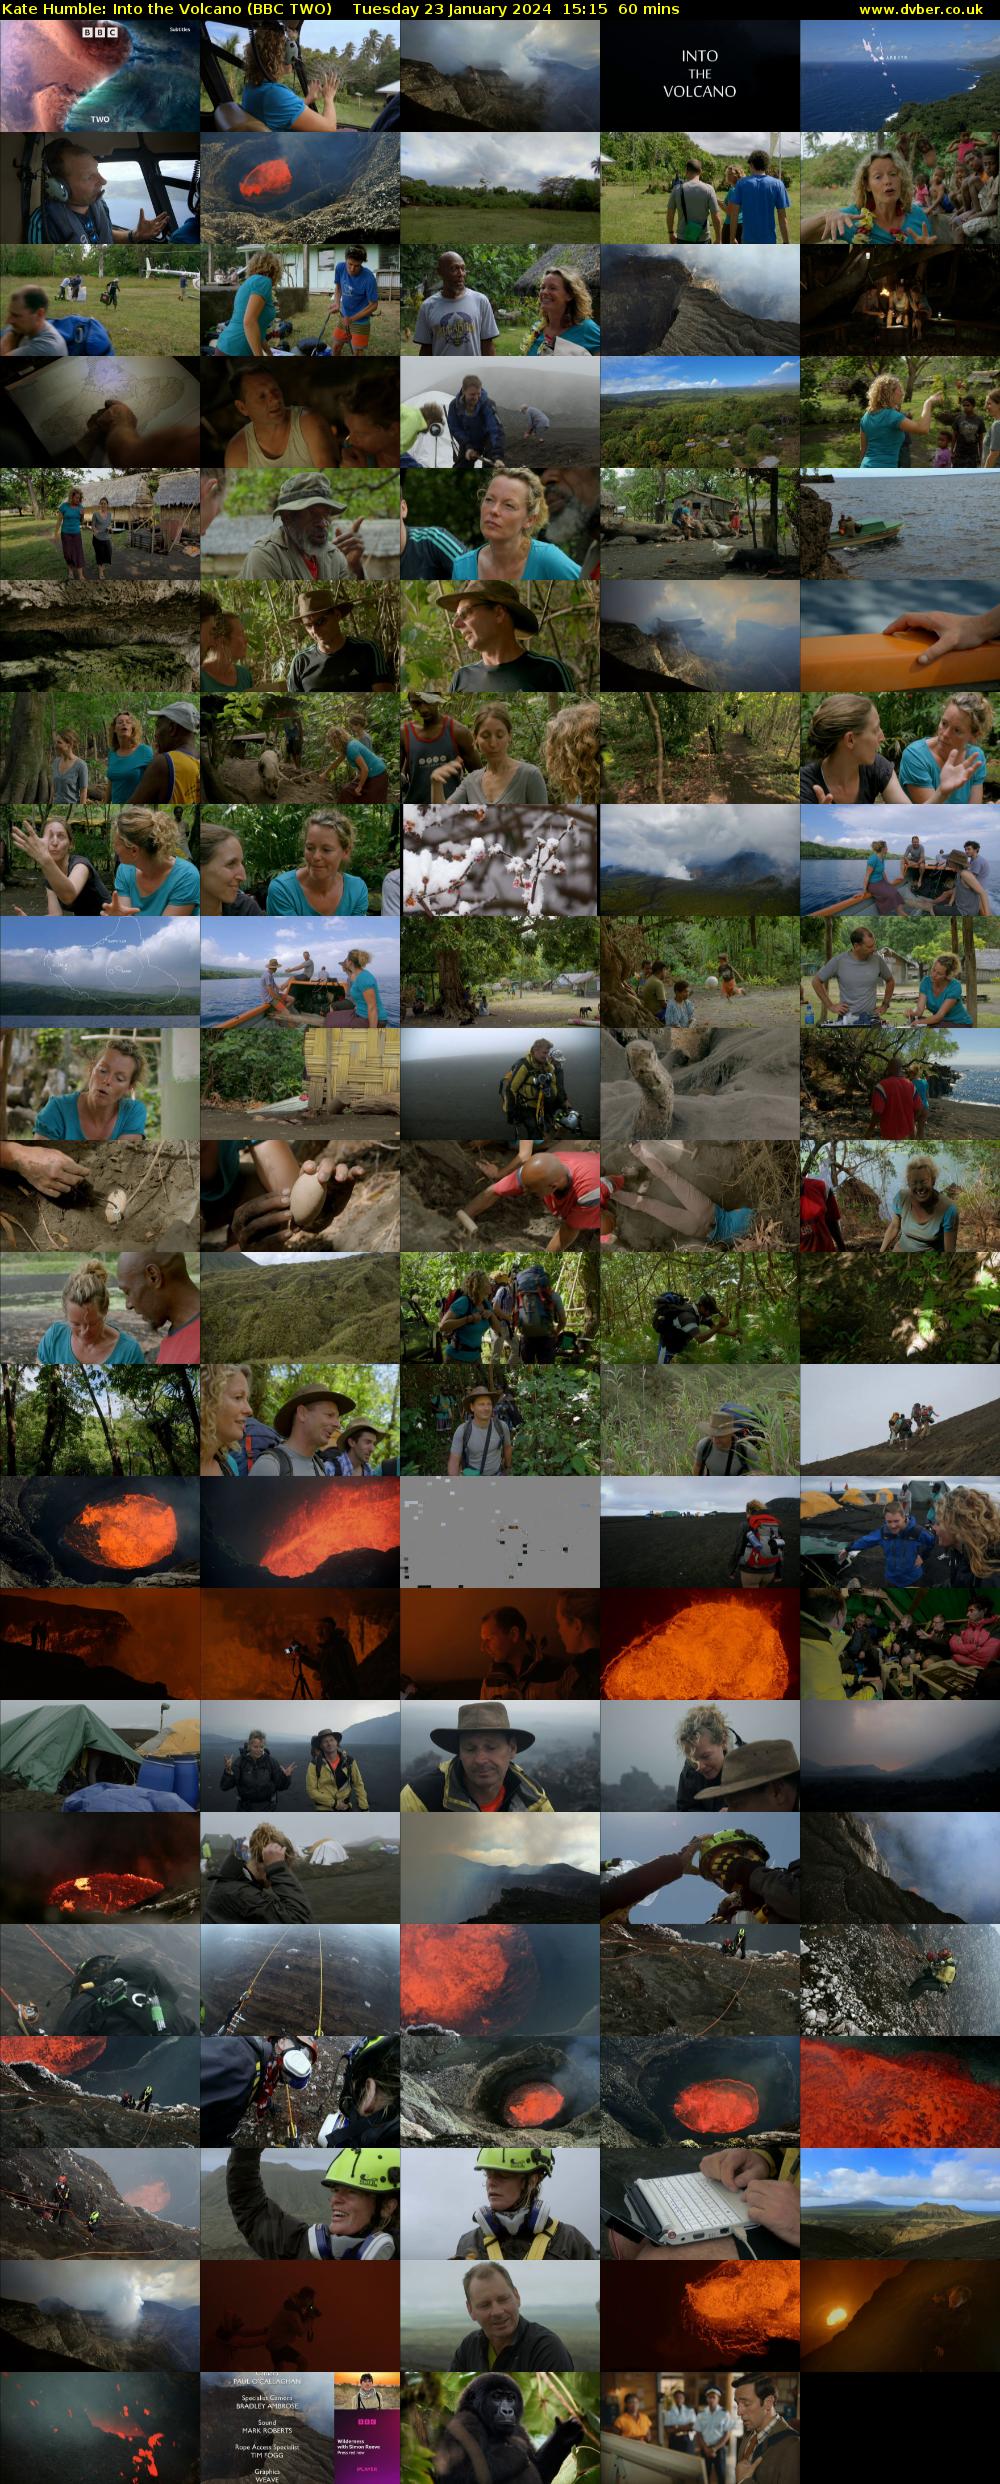 Kate Humble: Into the Volcano (BBC TWO) Tuesday 23 January 2024 15:15 - 16:15